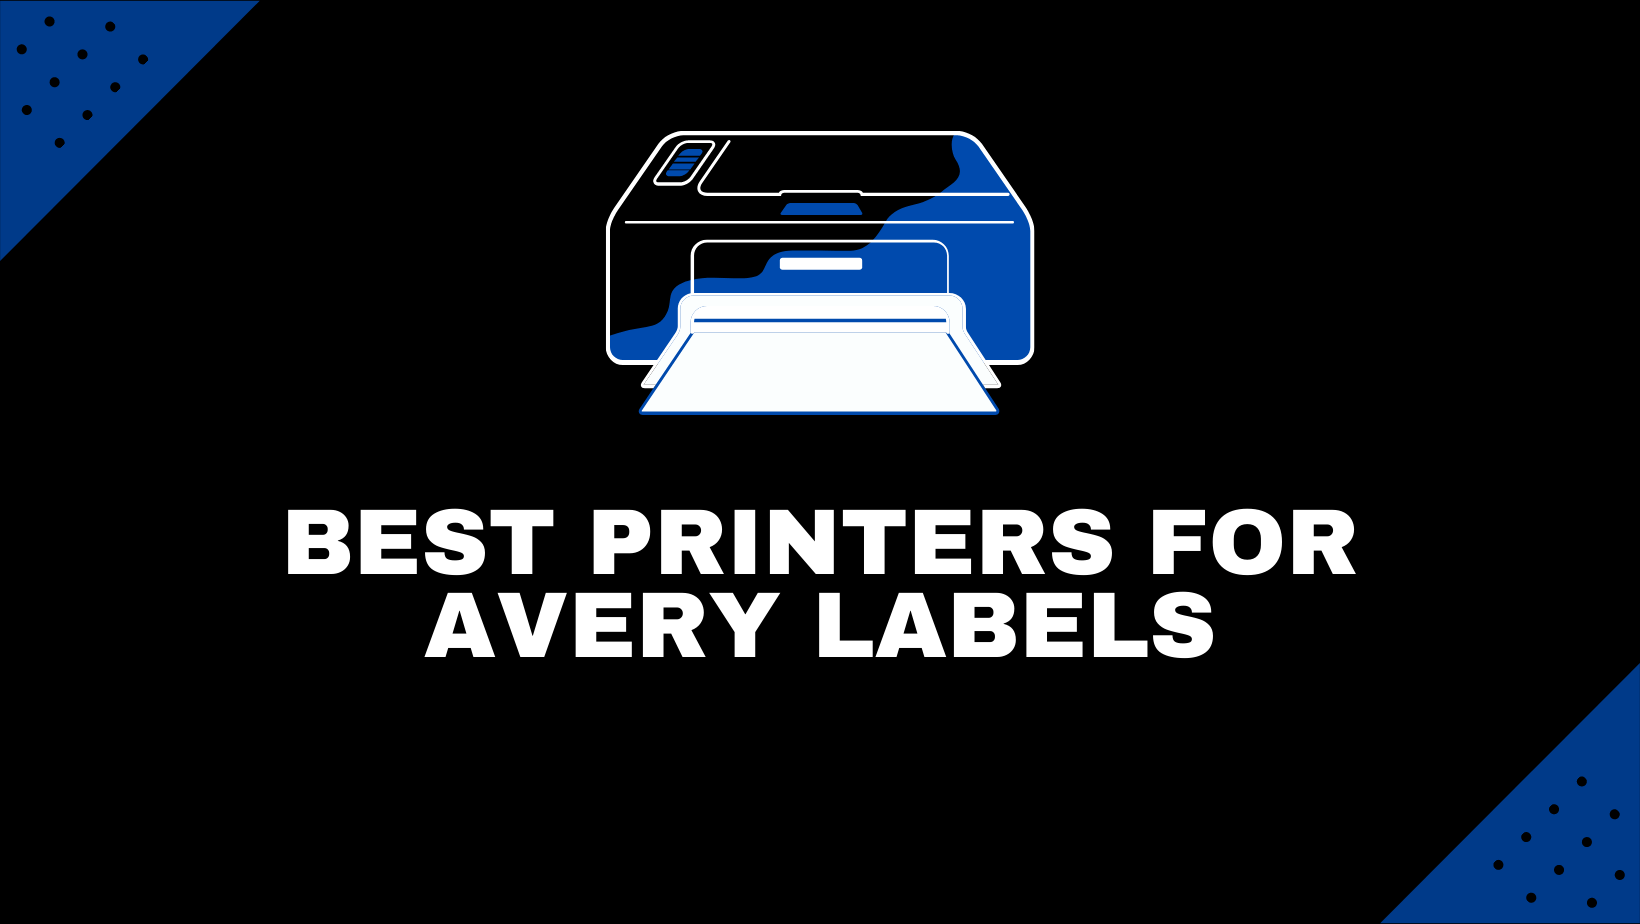 Best Printers For Avery Labels